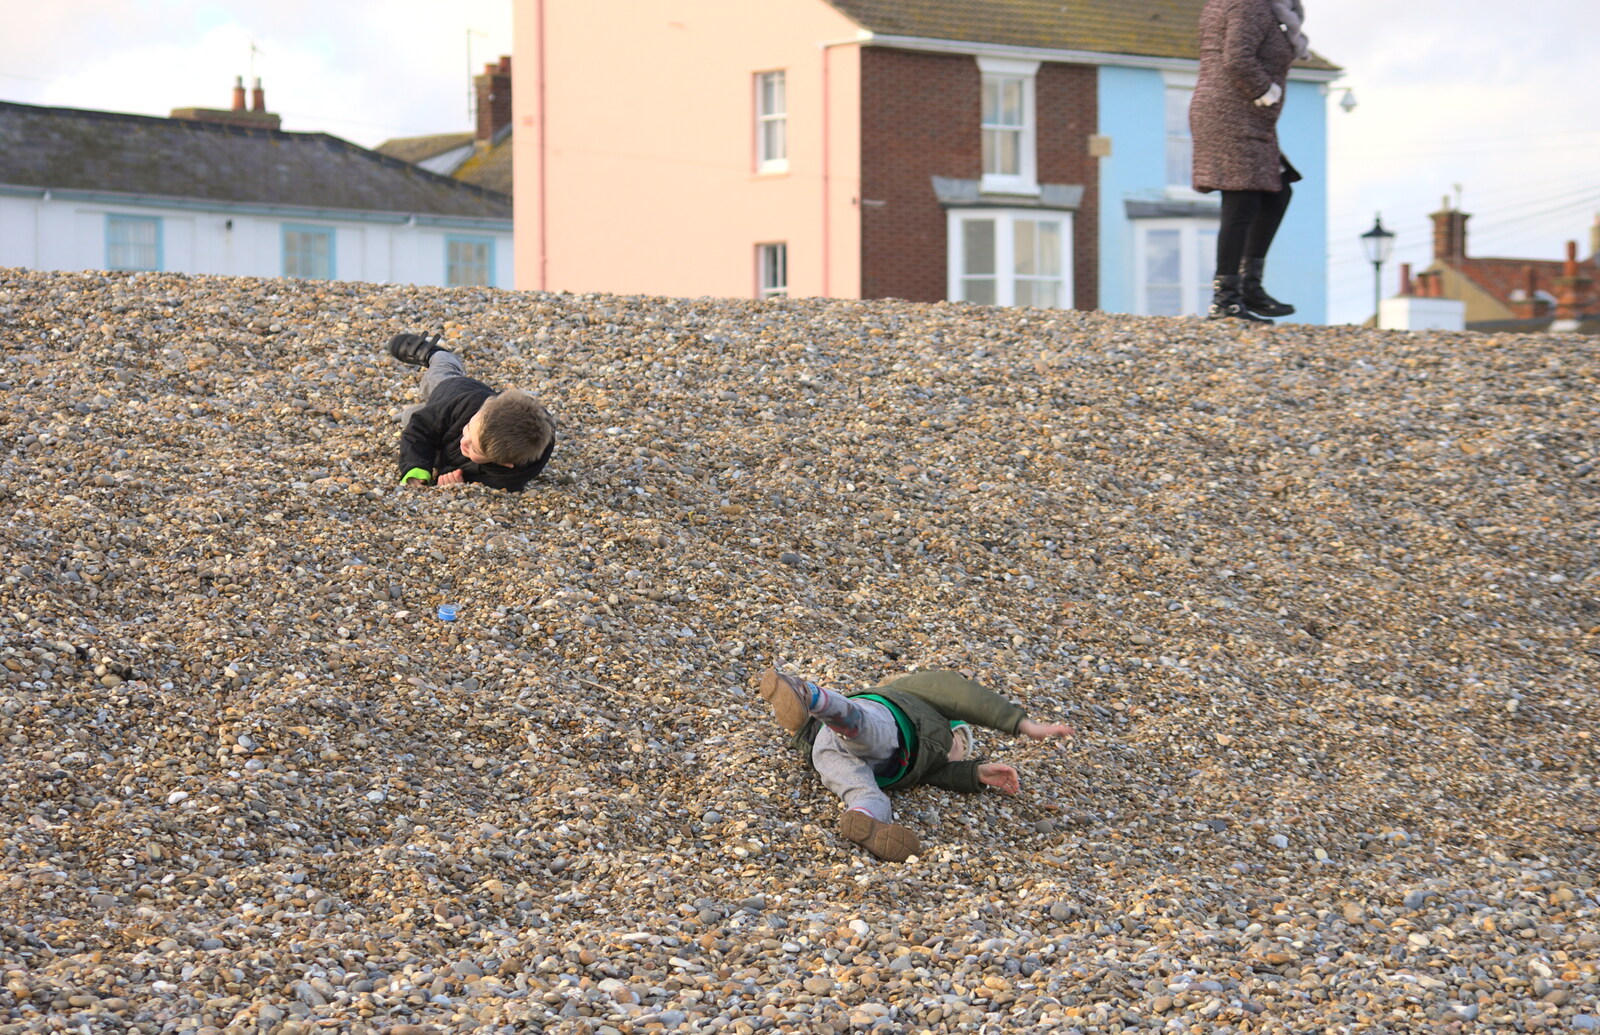 A Trip to Aldeburgh, Suffolk - 7th February 2016: Fred and Harry roll down the shingle hill